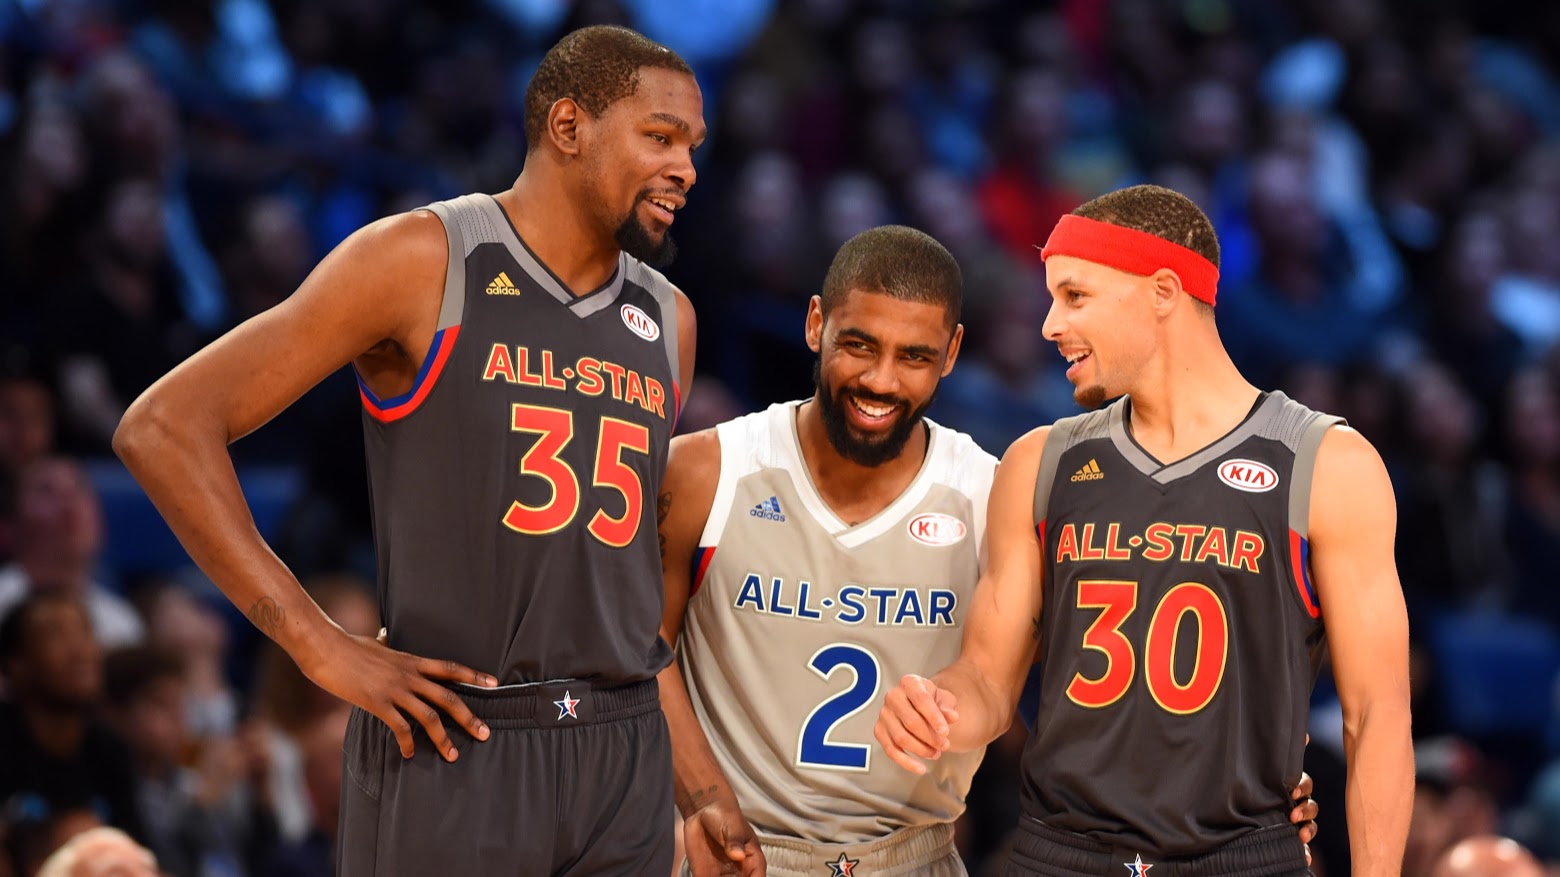 NBA All-Star Game Uniforms 2017: Pictures and Breakdown of This